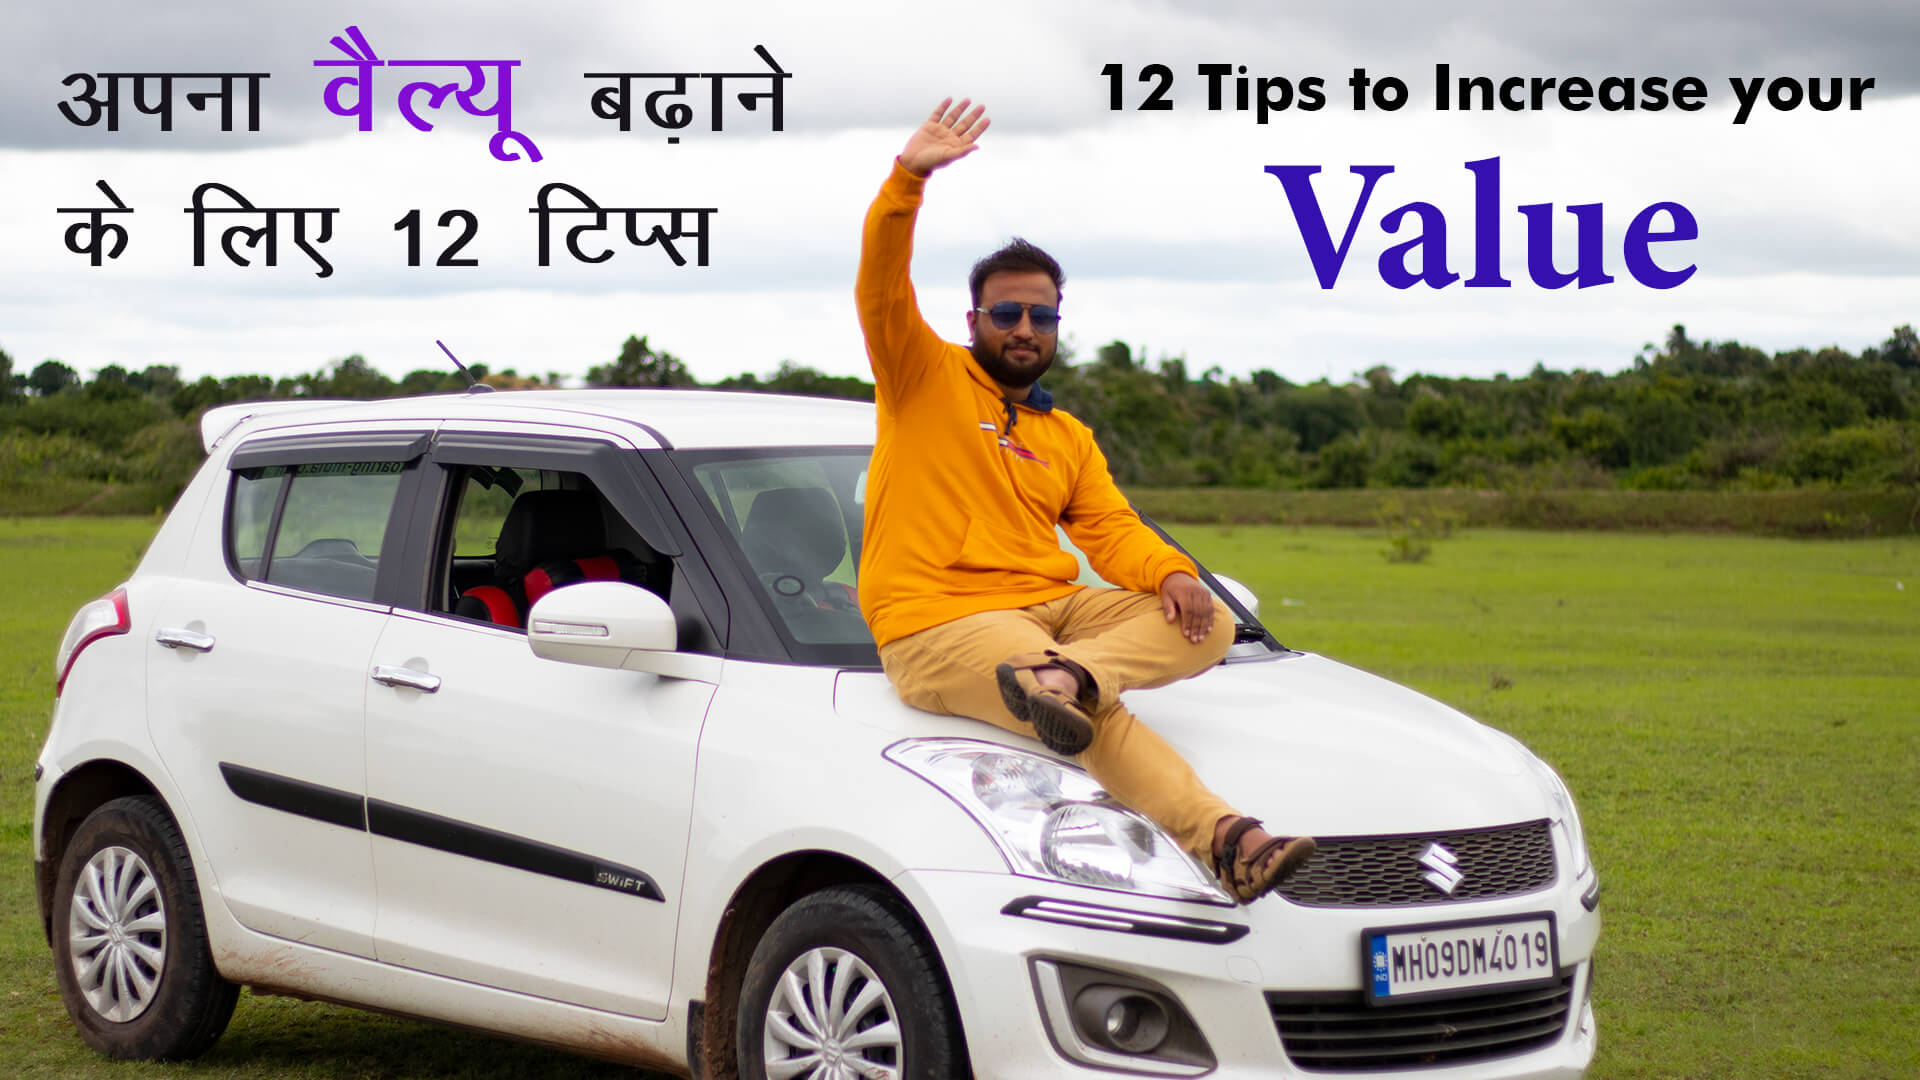 You are currently viewing 12 Tips to Increase Your Value in Hindi – How to get respected by Everyone? in Hindi